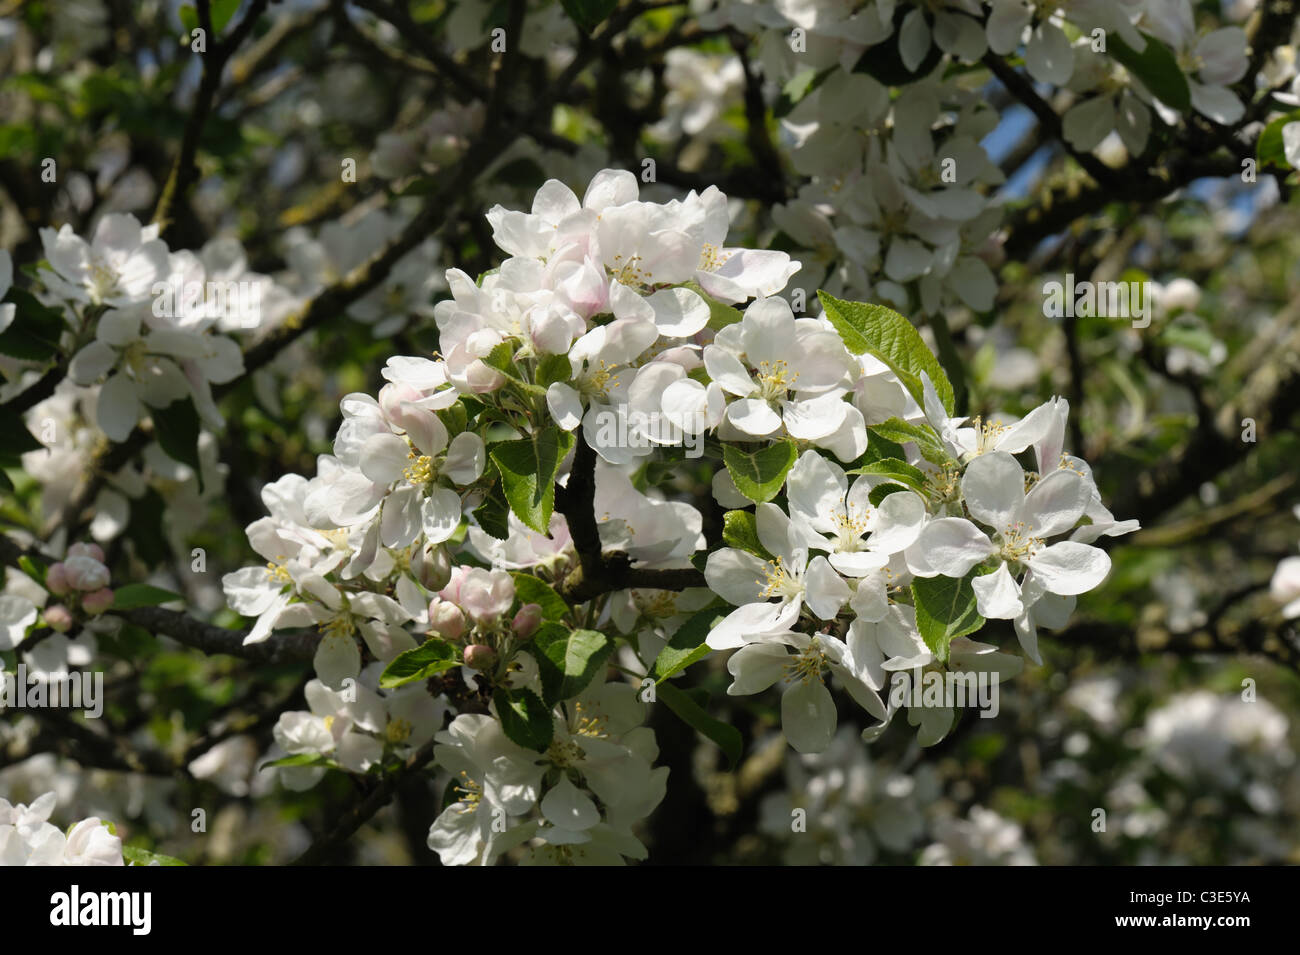 Blossom on a Discovery apple tree in full flower in spring, Devon Stock Photo